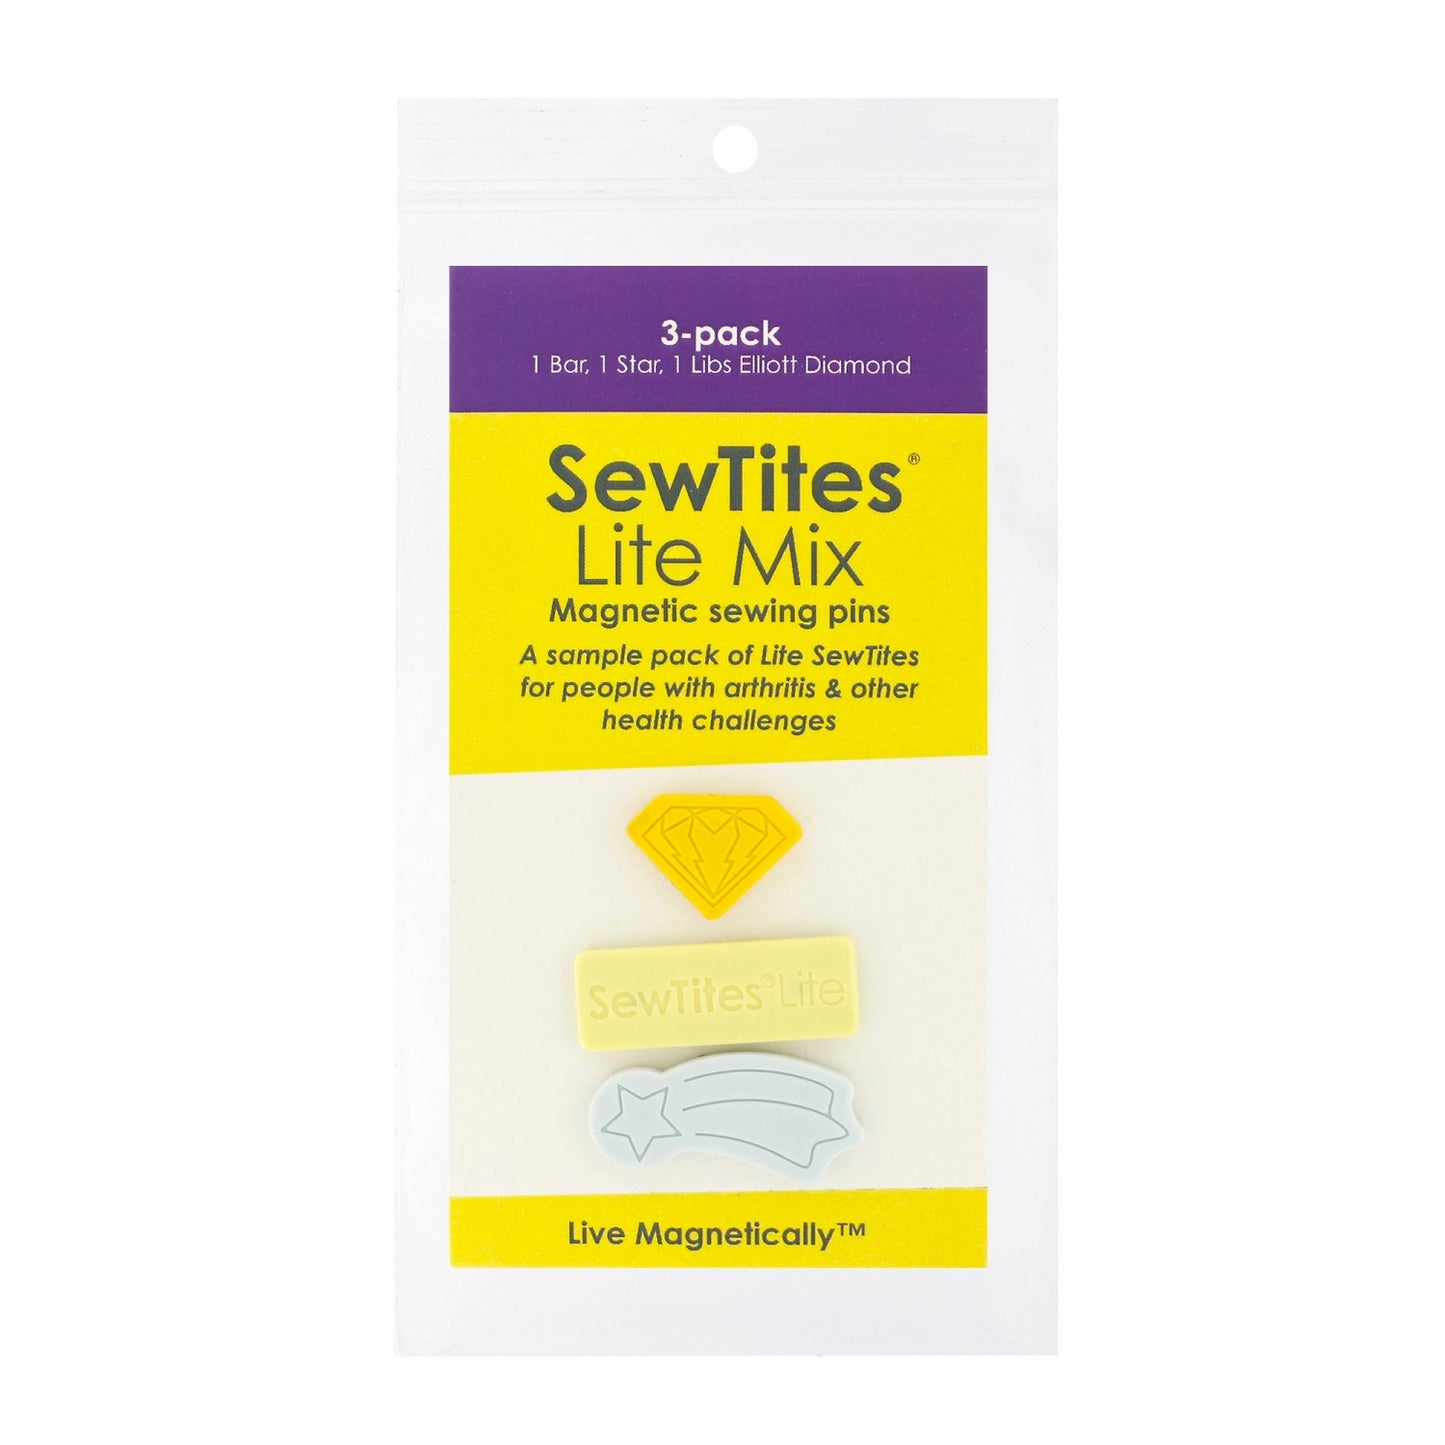 The SewTites Lite Mix packs contain a combination of our Lite models for people with arthritis and other health challenges – the Libs Elliott Diamond, Lite Star, and Lite Bar.  The 3-pack is a perfect trial pack for those new to using SewTites (it also makes a lovely stocking stuffer or gift!).